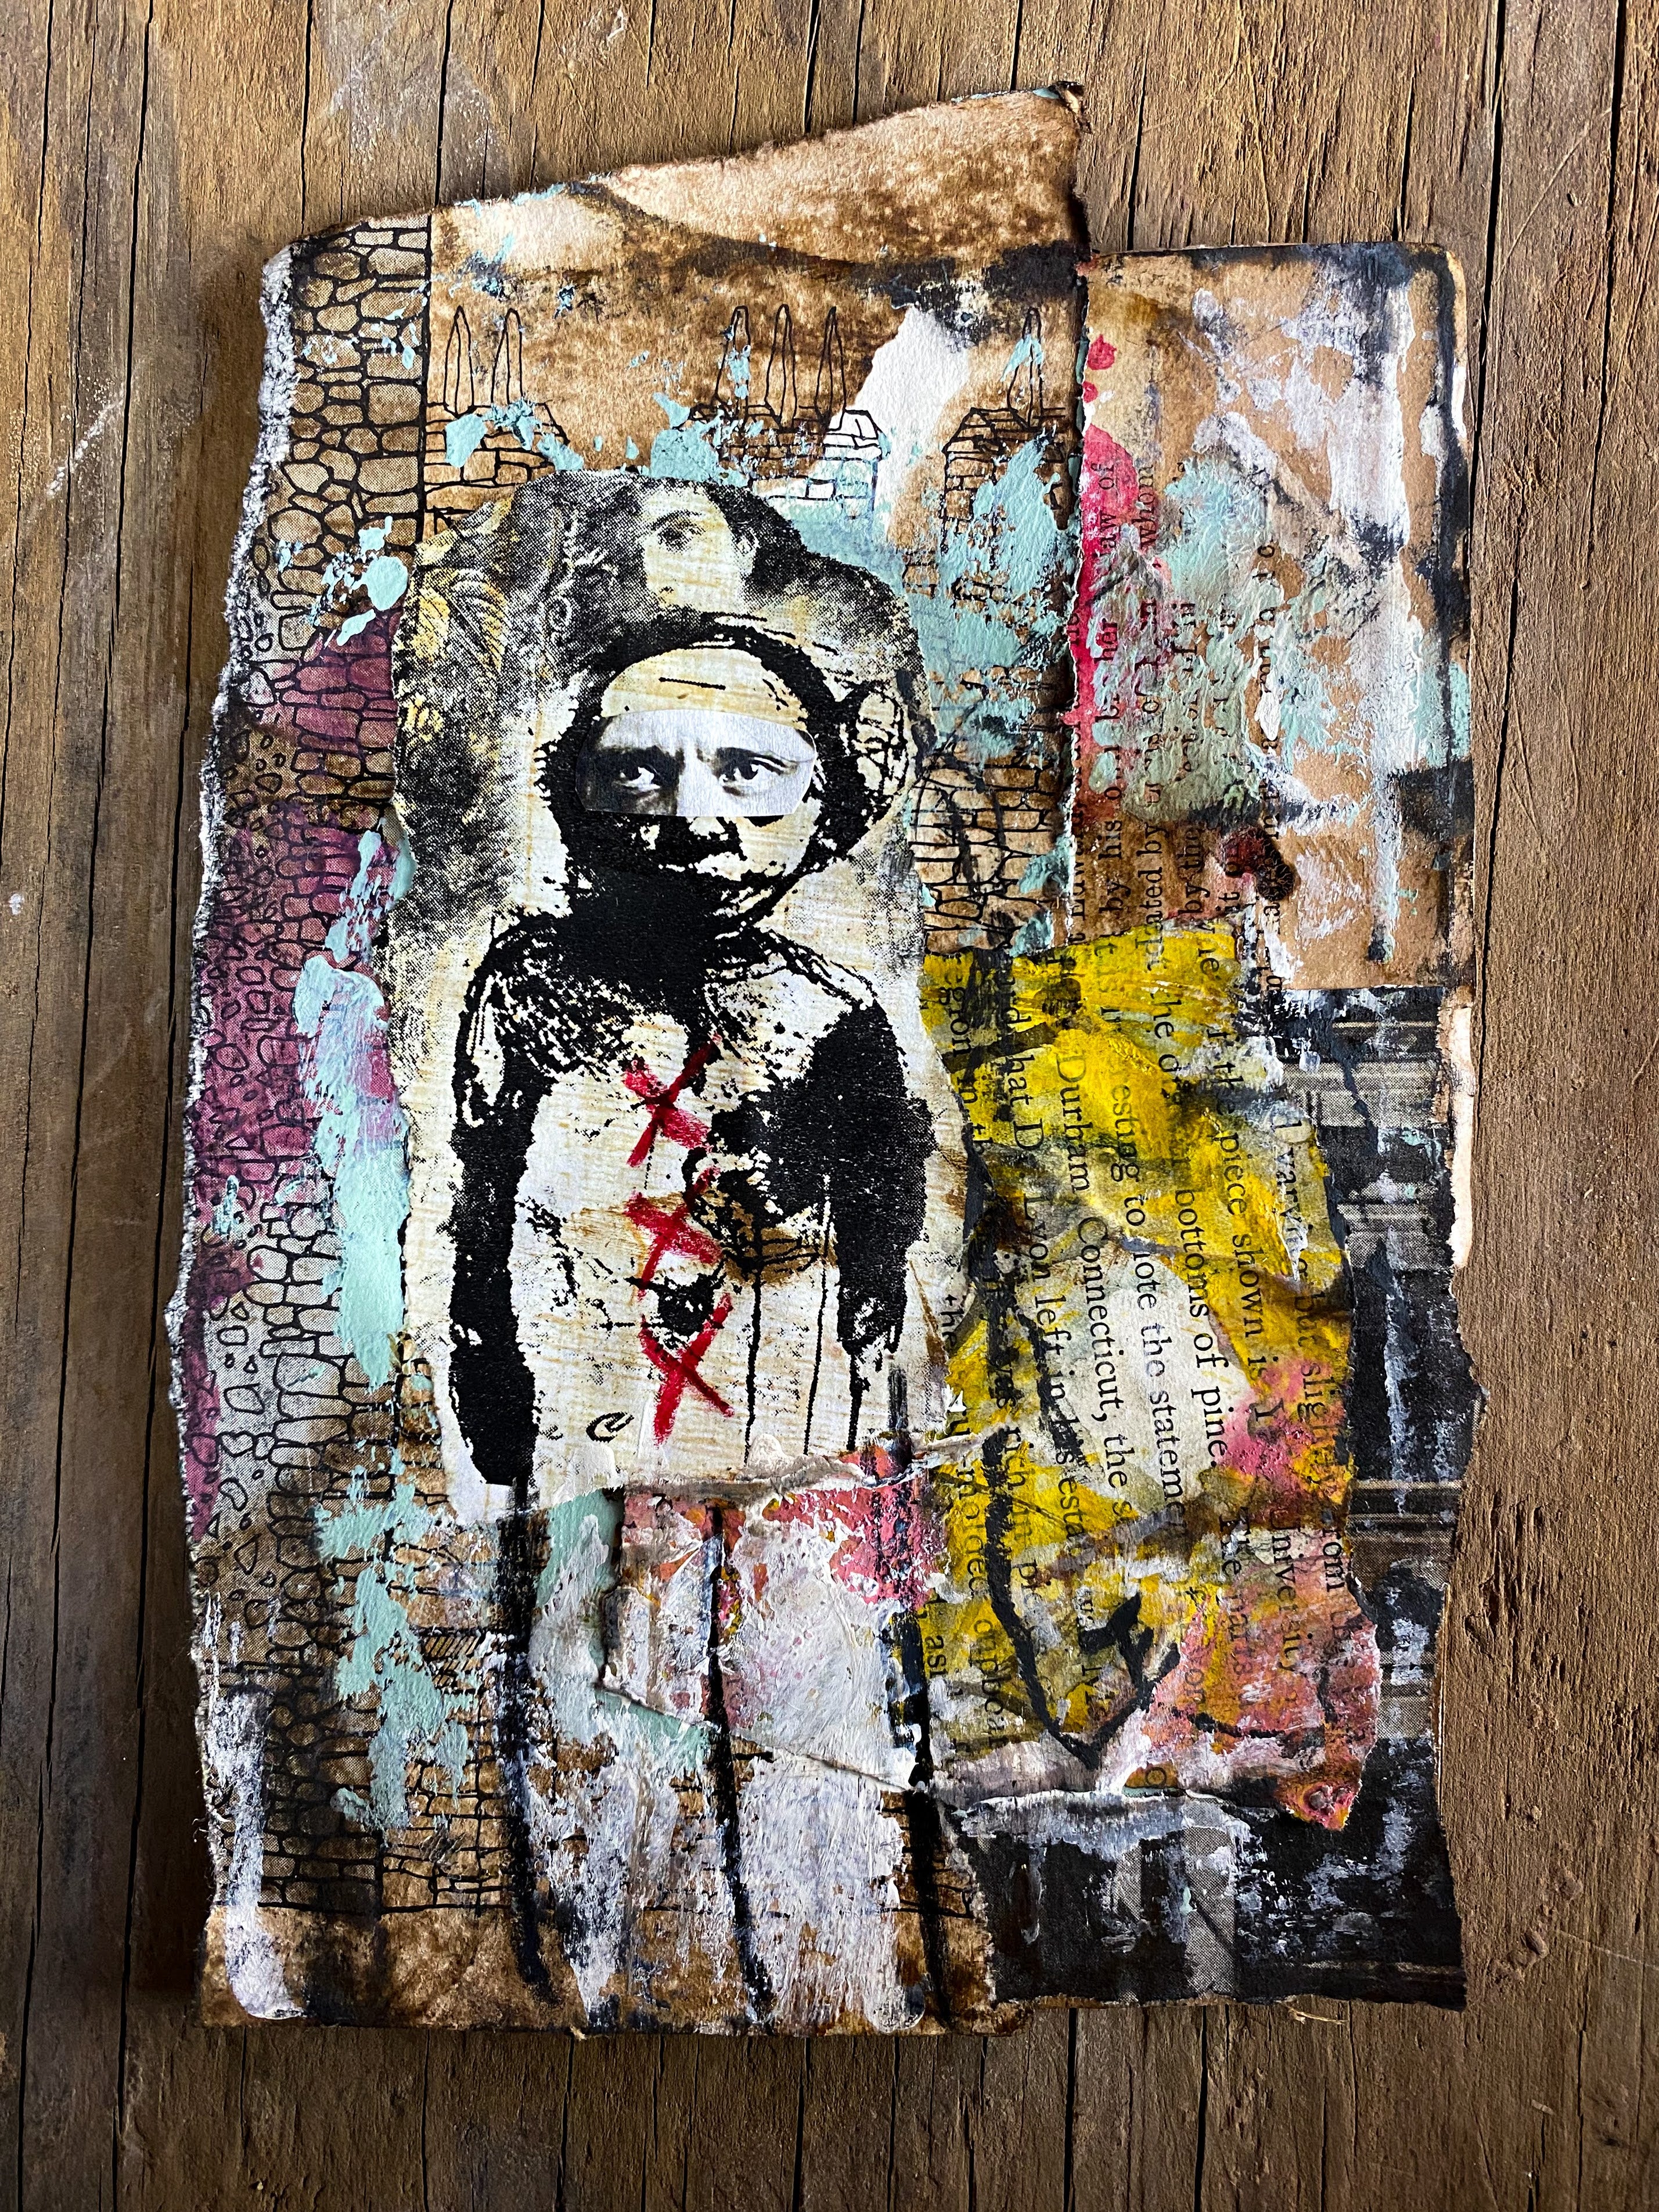 Outsider - Original Mixed Media Collage